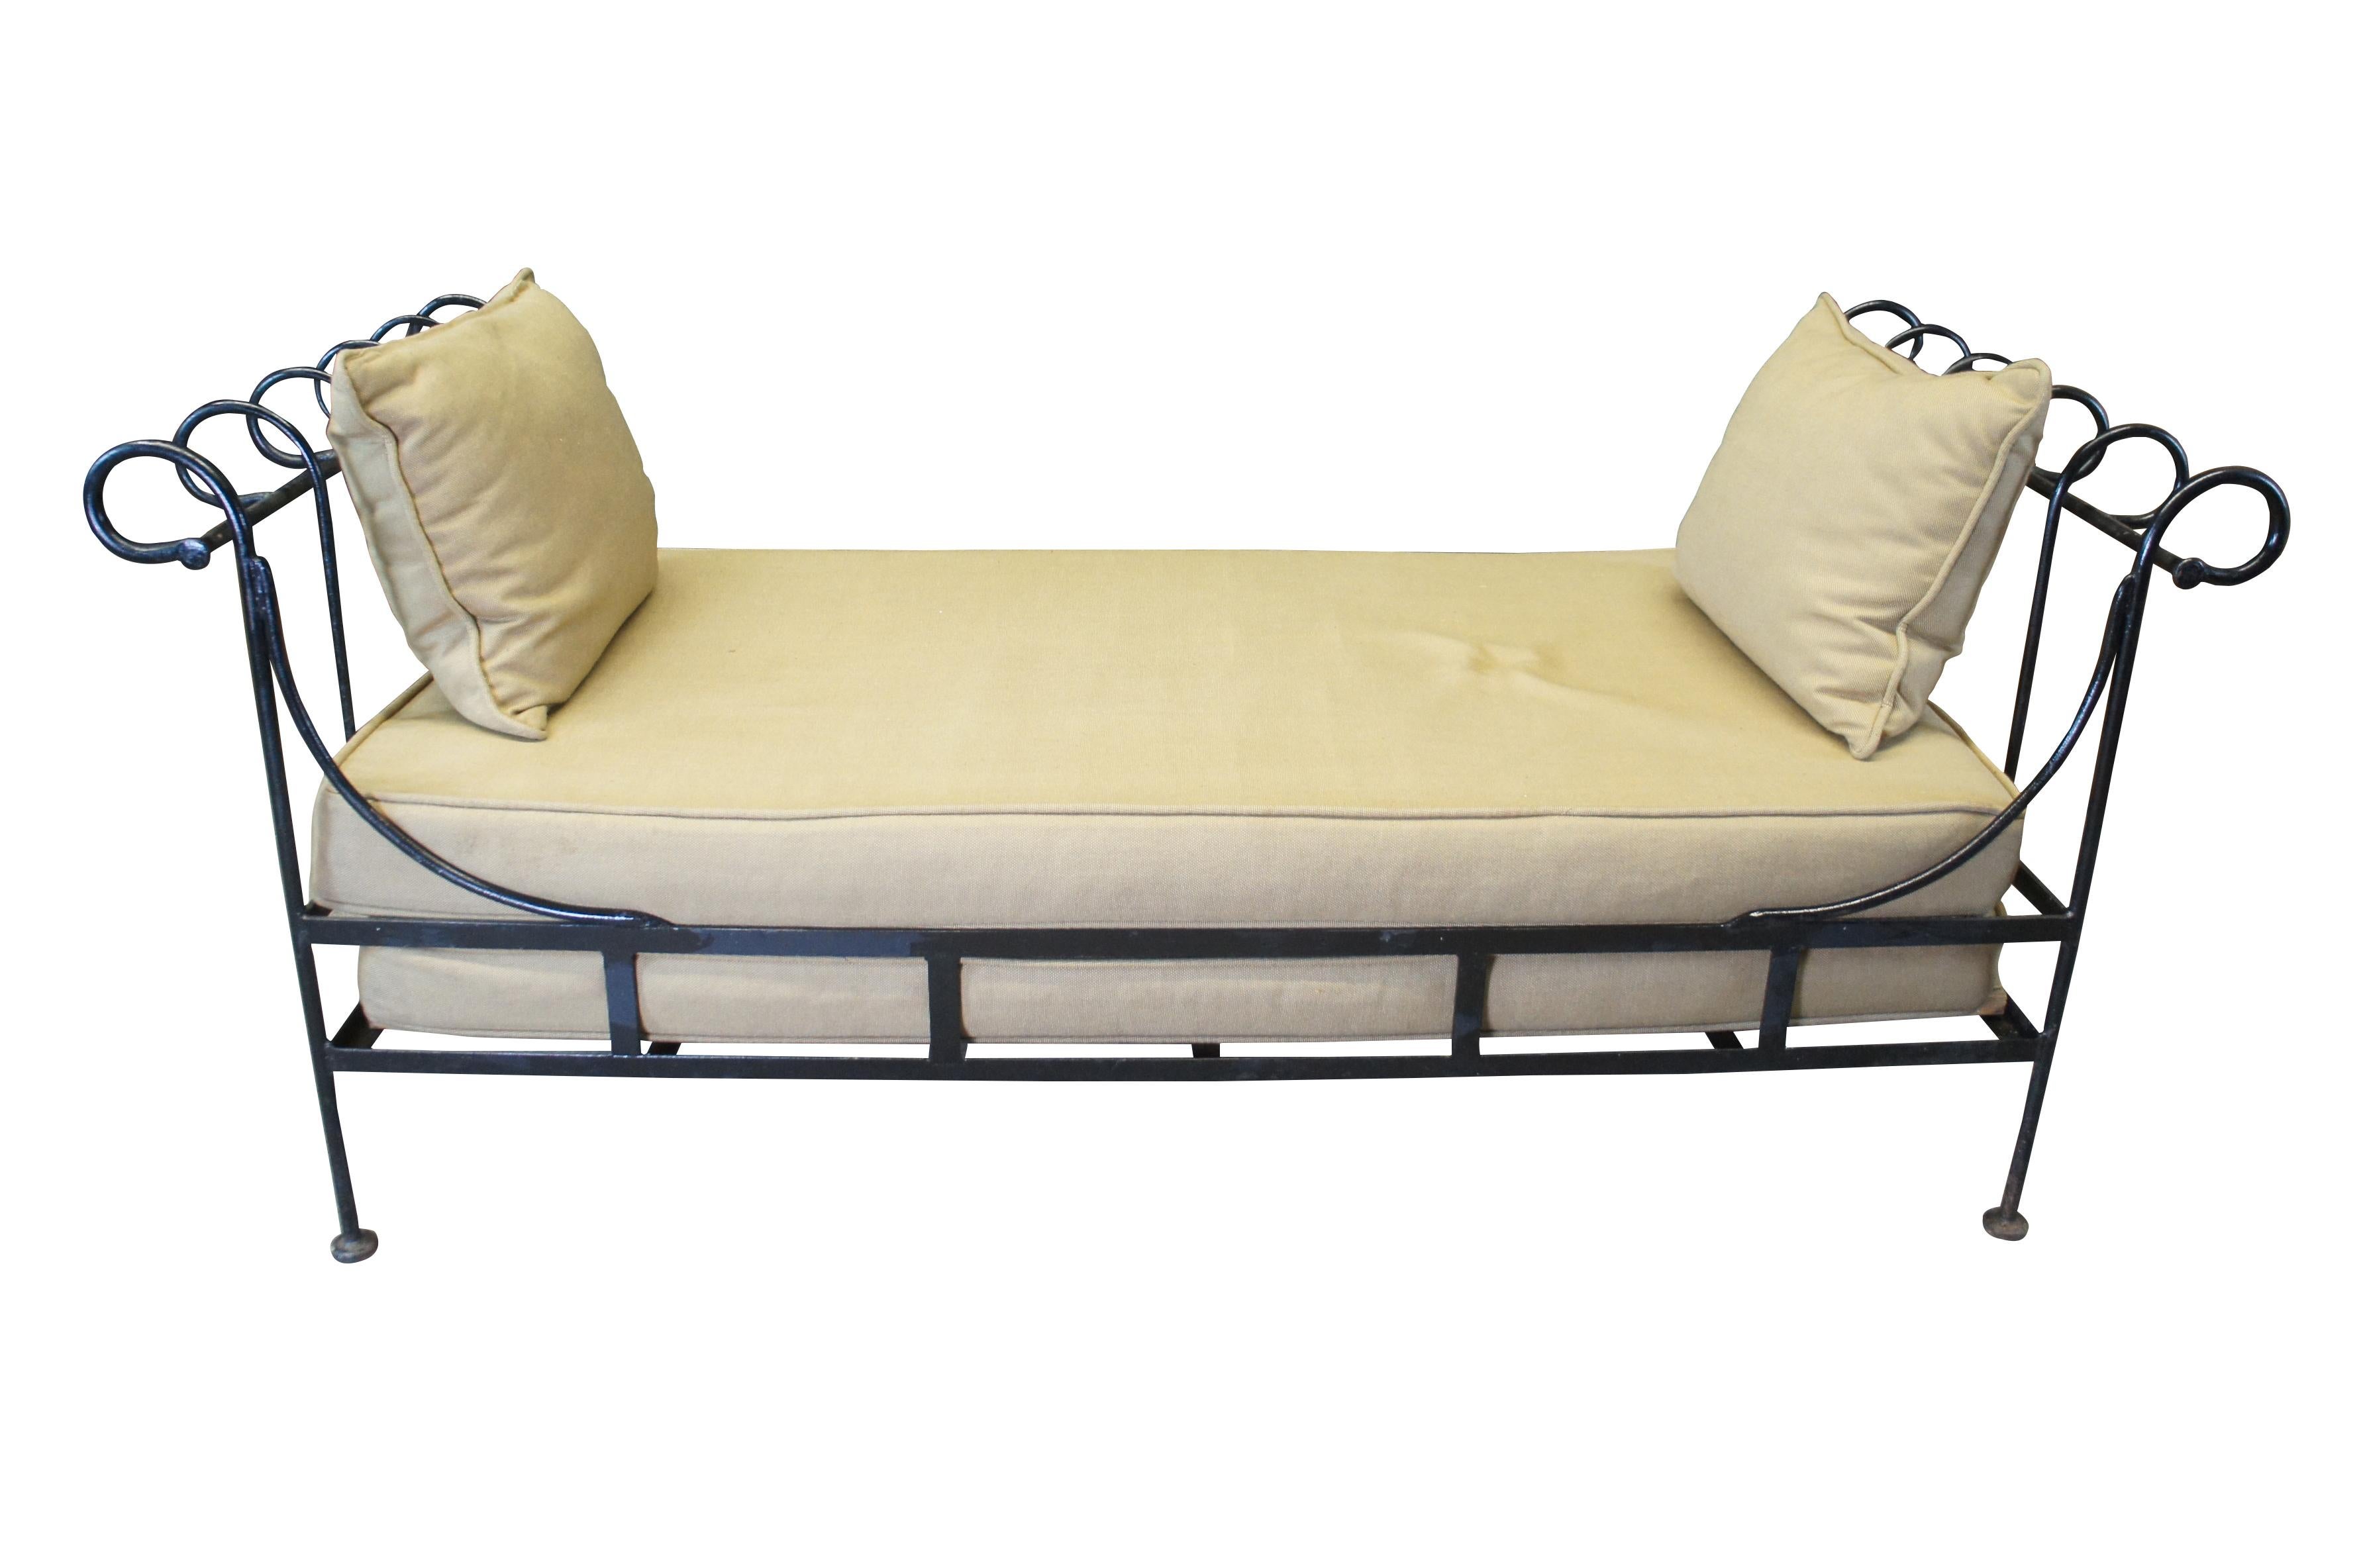 Vintage Neoclassical Directoire style outdoor settee daybed.  Made of iron featuring scrolled accents and waterproof cushions.

DIMENSIONS

31